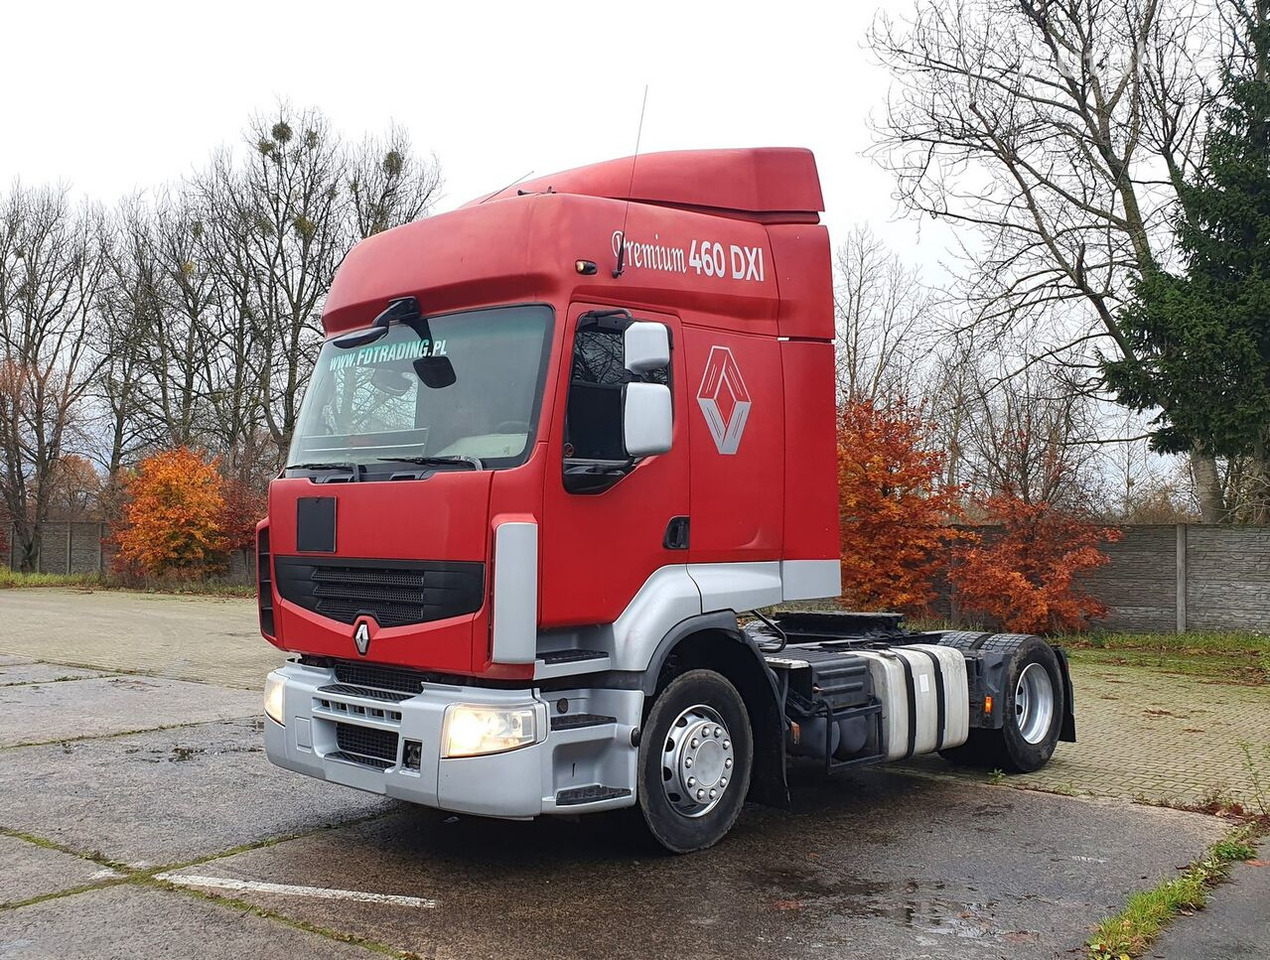 Renault PREMIUM 460 DXI, 2012 year - Tractor unit: picture 3